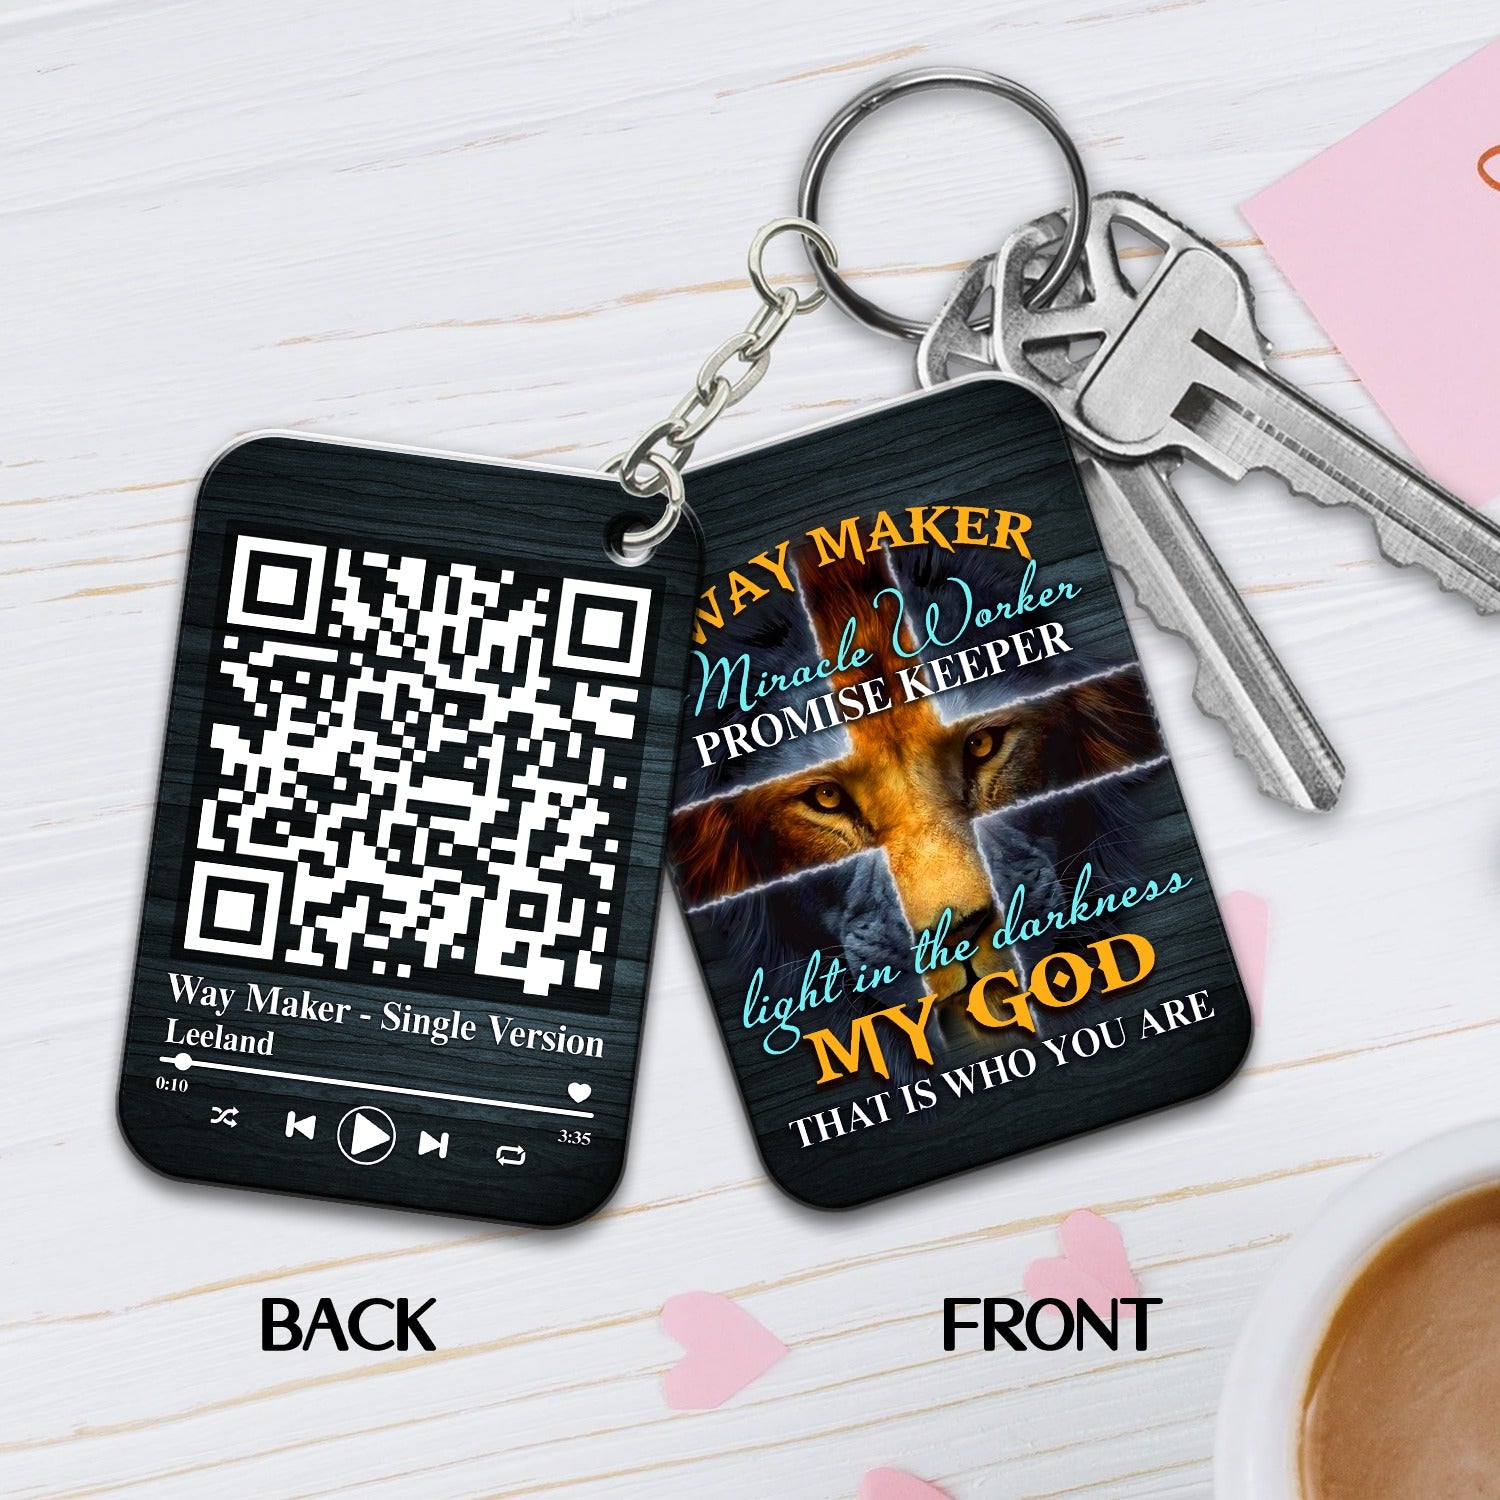 Way Maker Miracle Worker Promise Keeper Light In The Darkness My God Song Scannable QR Code Wooden Keychain